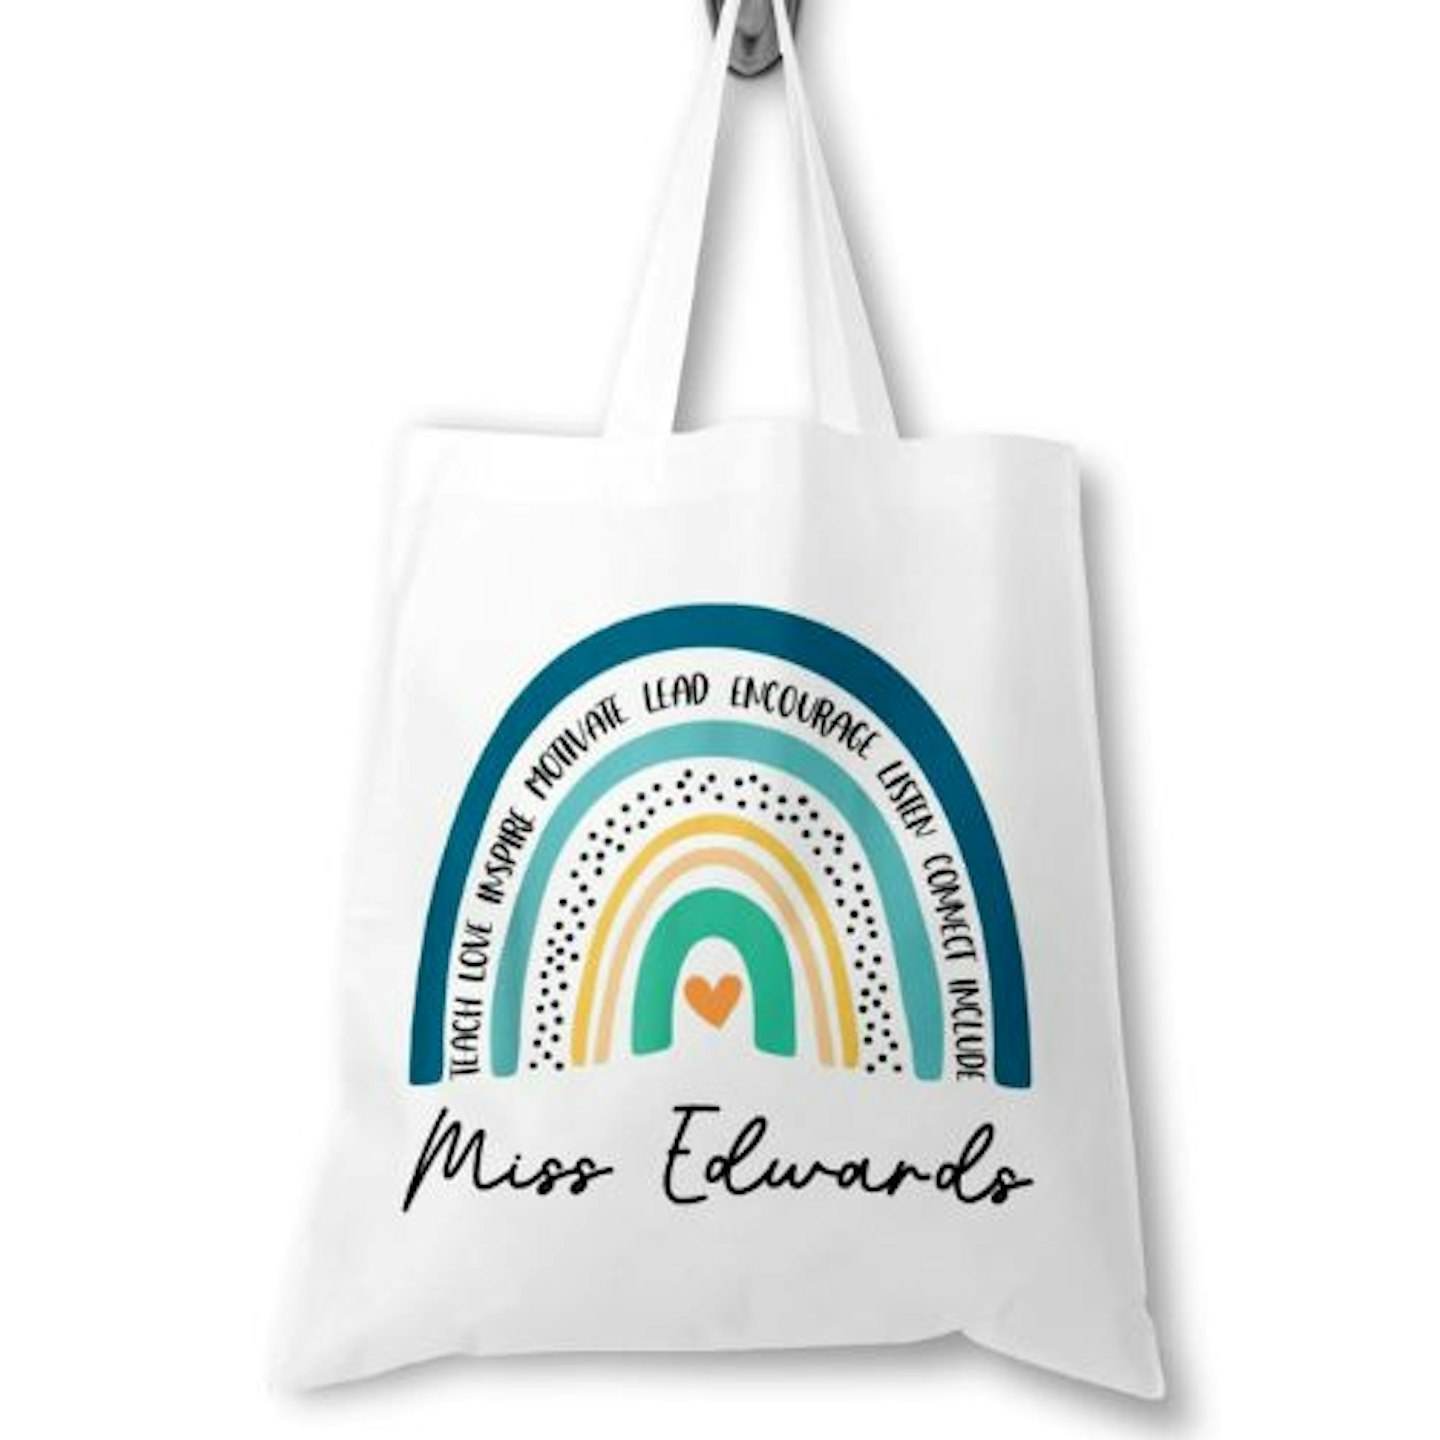 Best Christmas Gifts For Teachers: Personalised Teacher Bag with Customisable Name